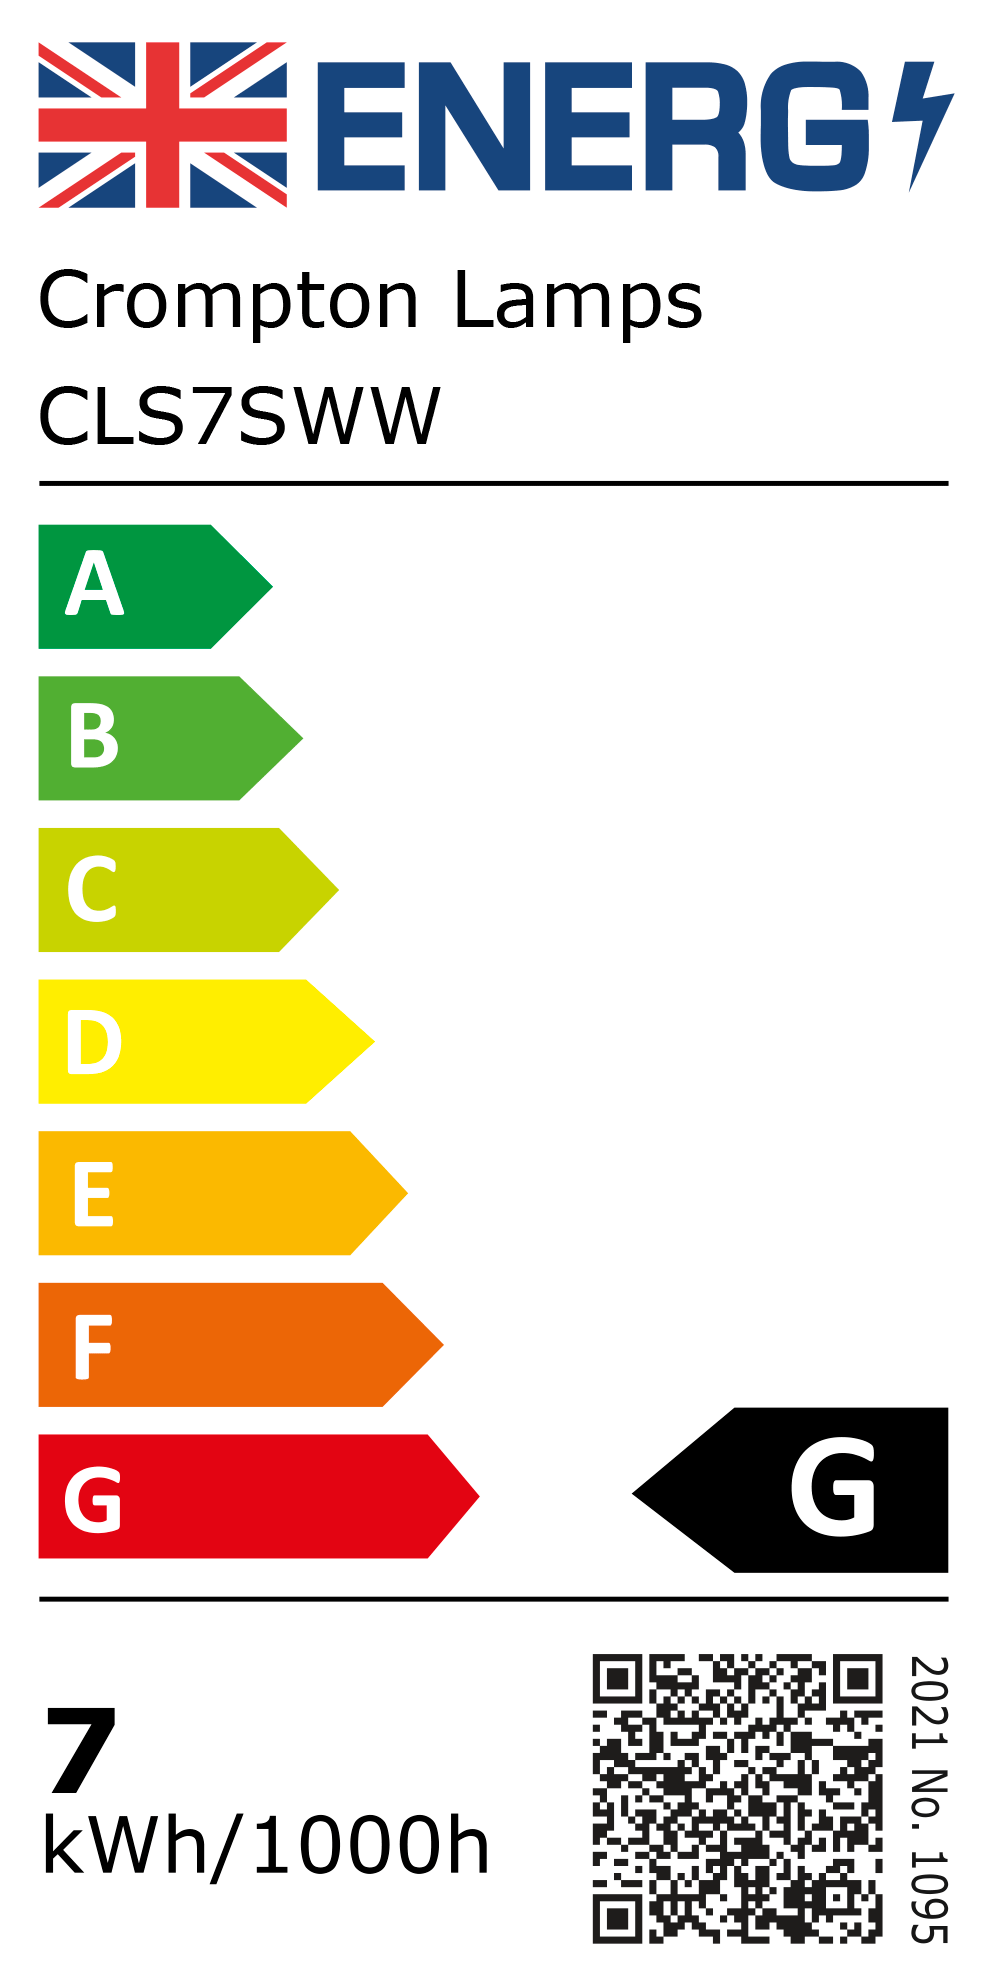 New 2021 Energy Rating Label: Stock Code CLS7SWW